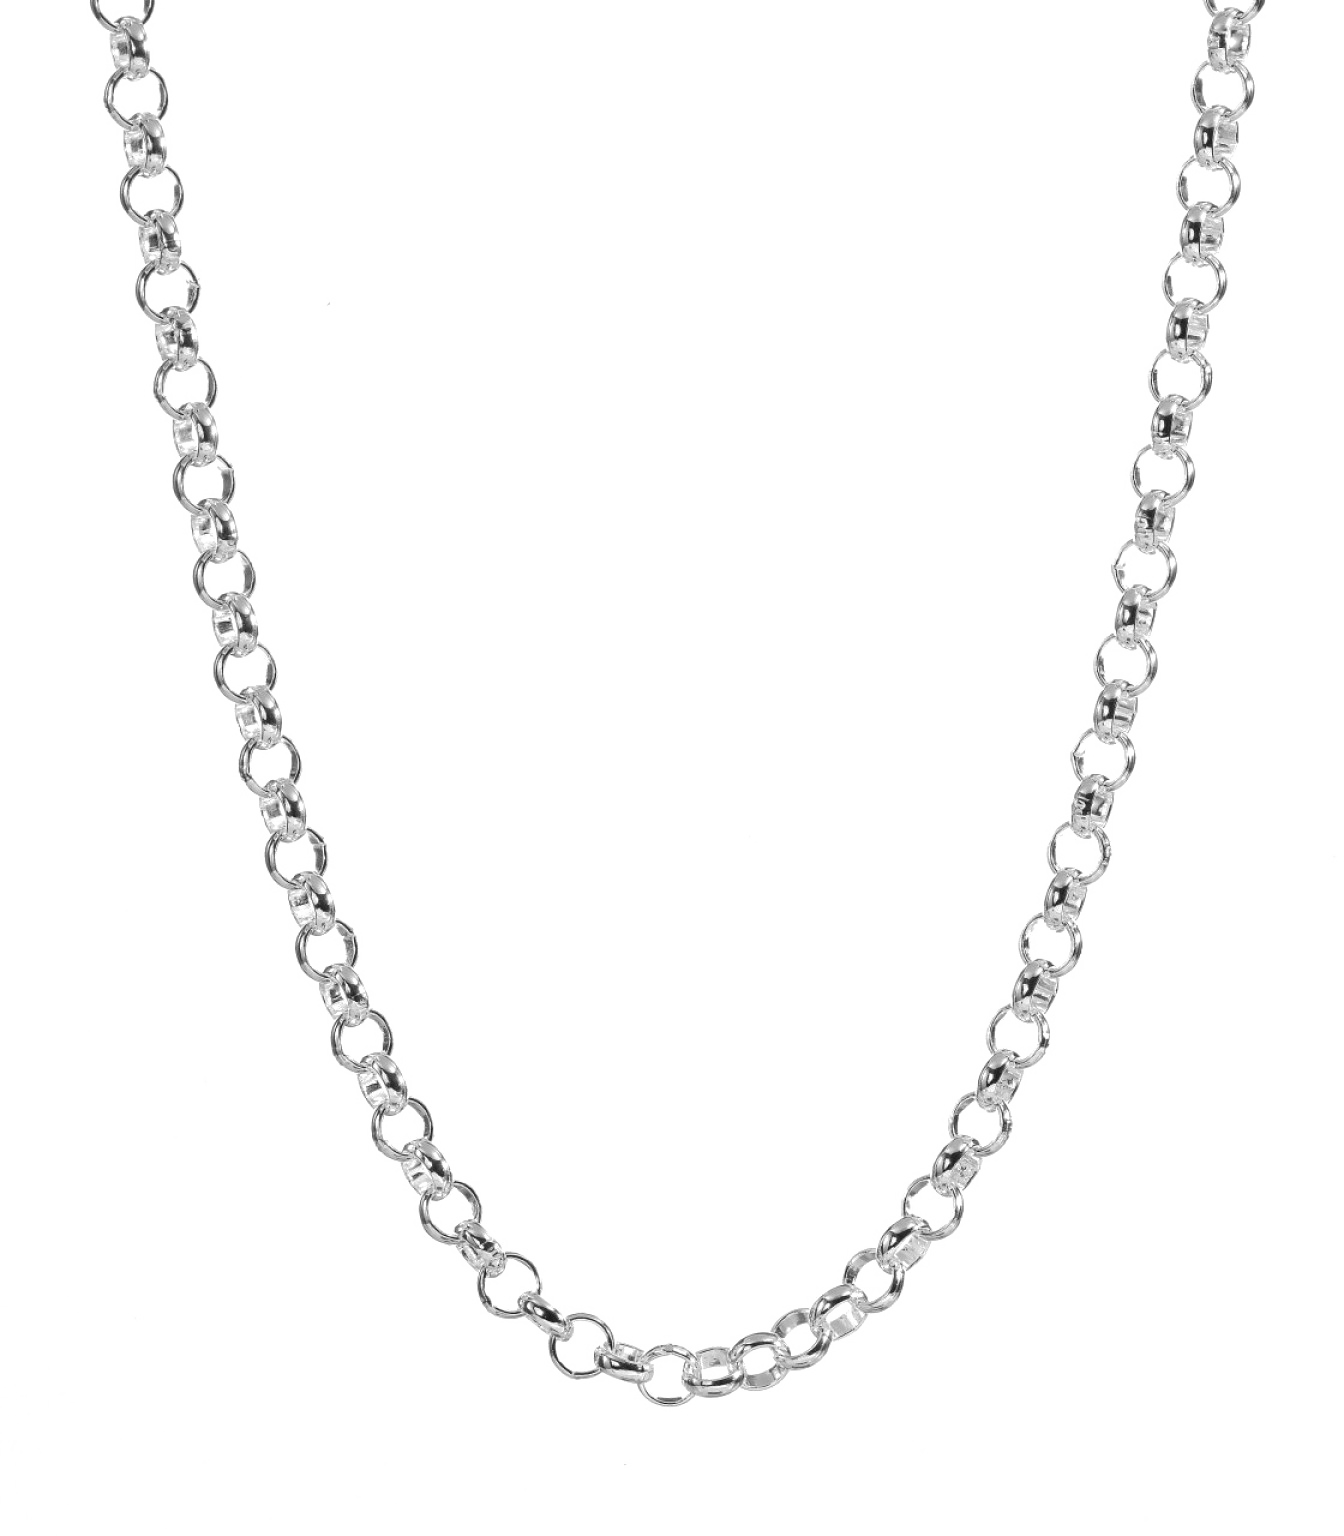 Silver Chain Download PNG Image